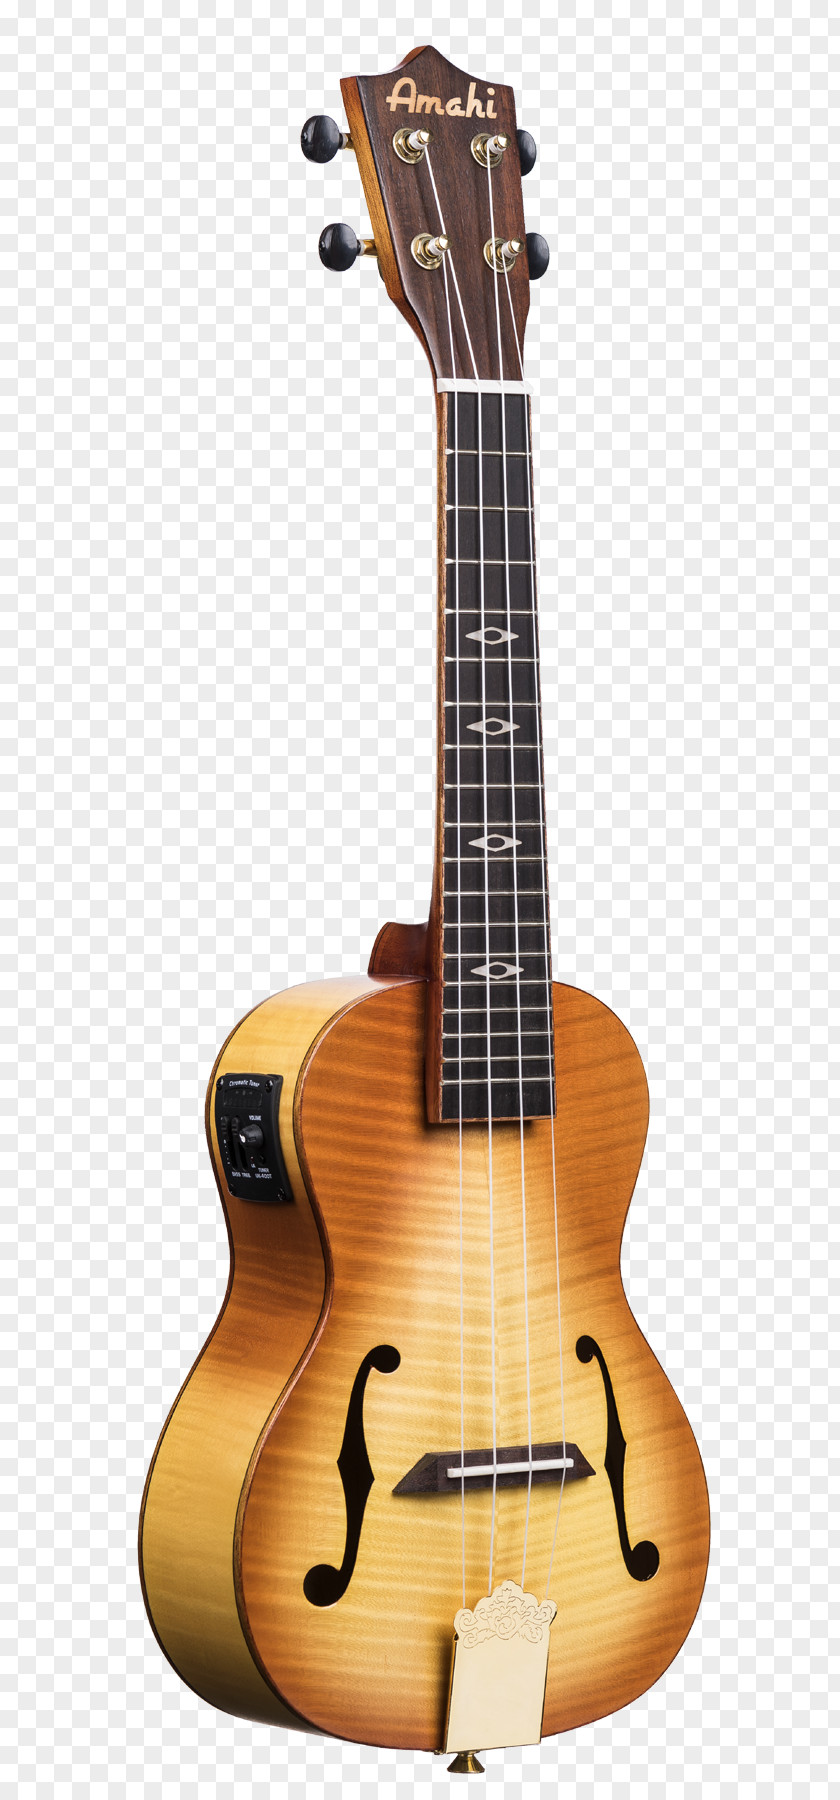 Suzuki Electric Ukulele Archtop Guitar Flame Maple Acoustic PNG